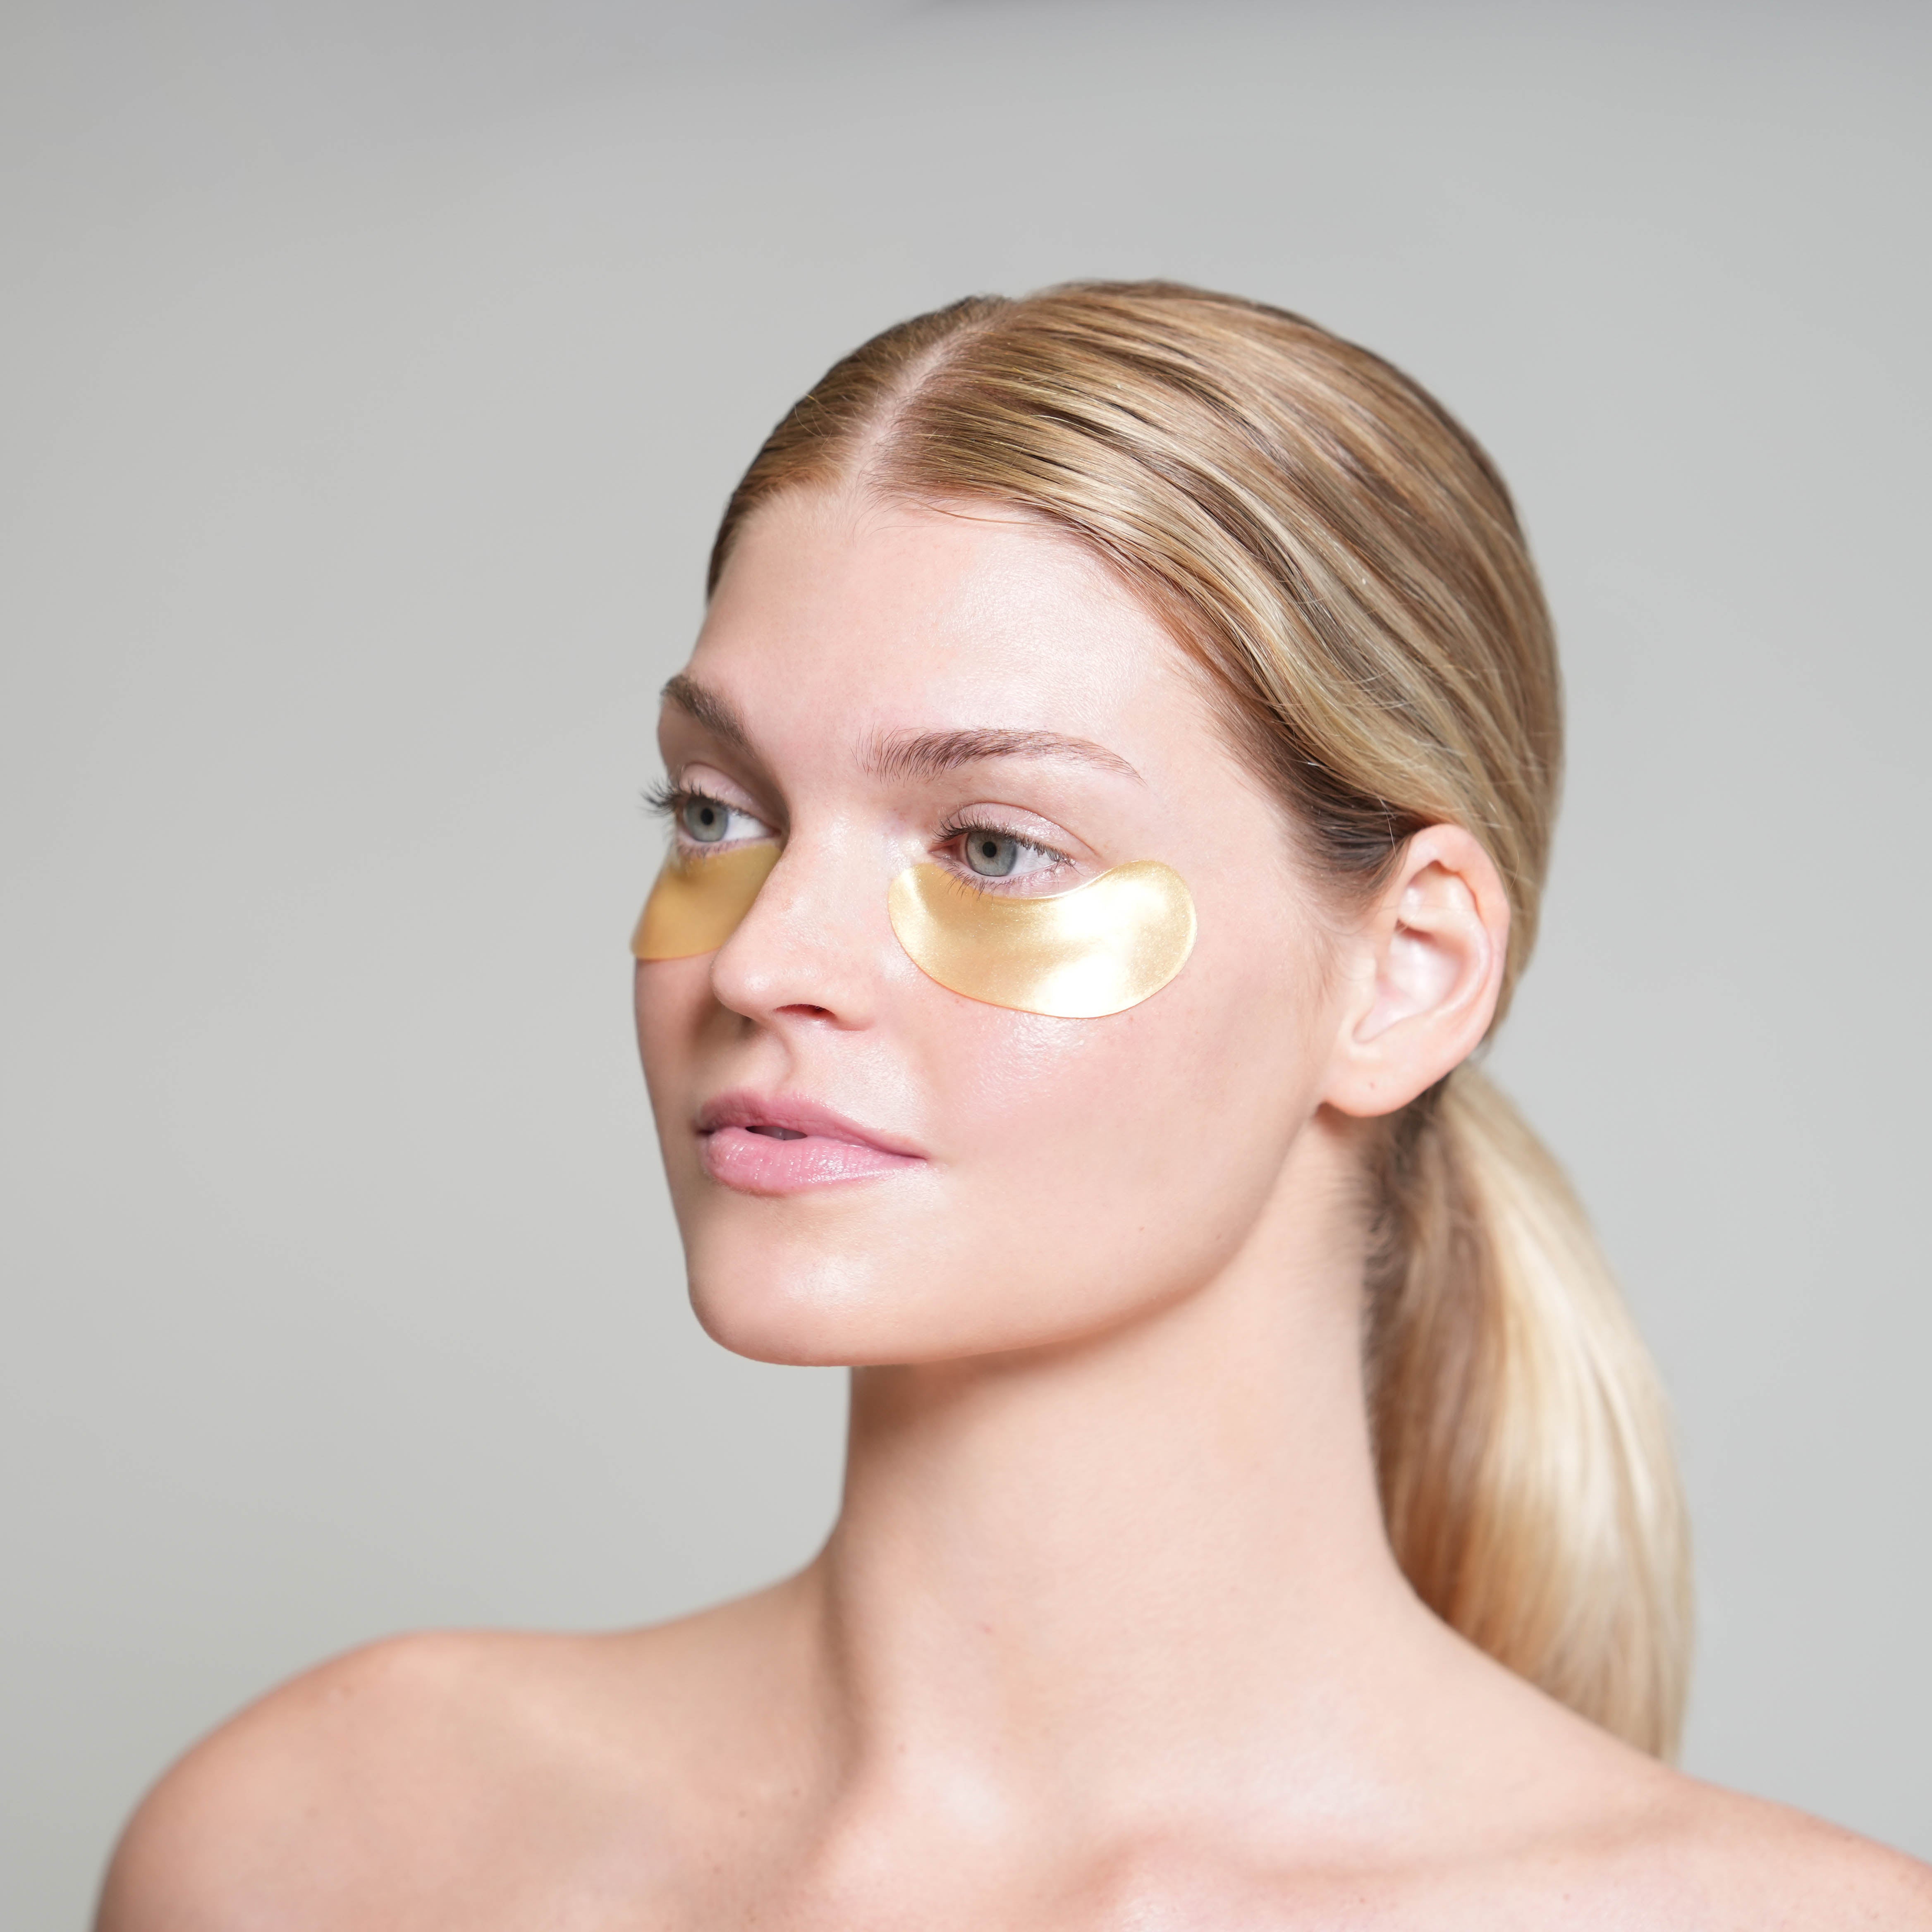 Gold Eye Patches